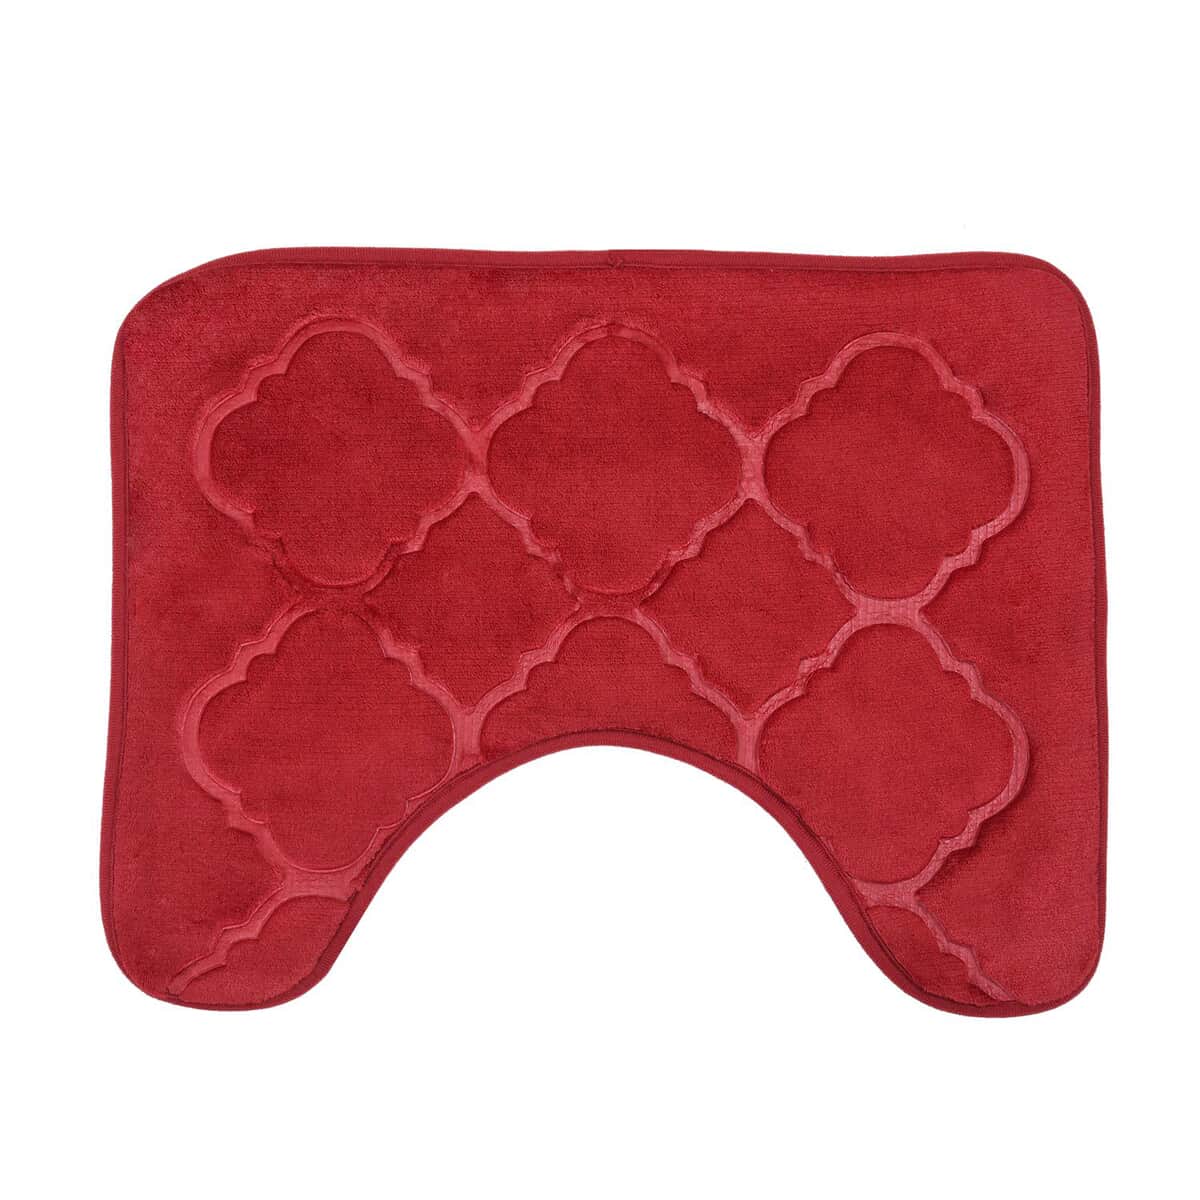 HOMESMART Red Embossed Flannel Non-Woven Anti Slip Dot Backing Bath Mat (19"x31") and Contour Toilet Mat (19"x15") image number 6